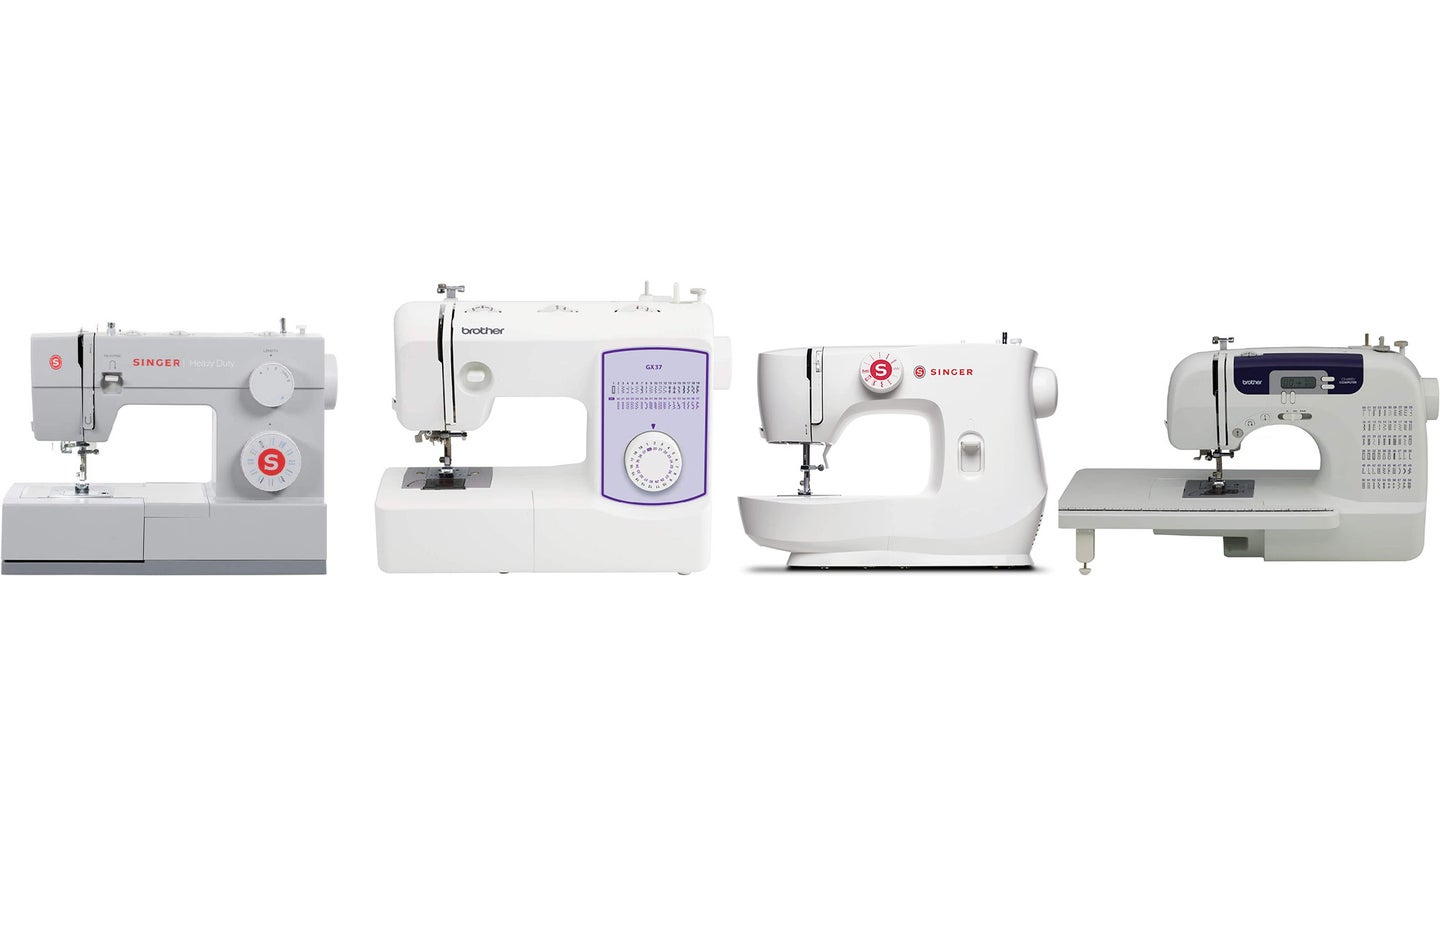 The best sewing machines will help you unfurl your creativity.